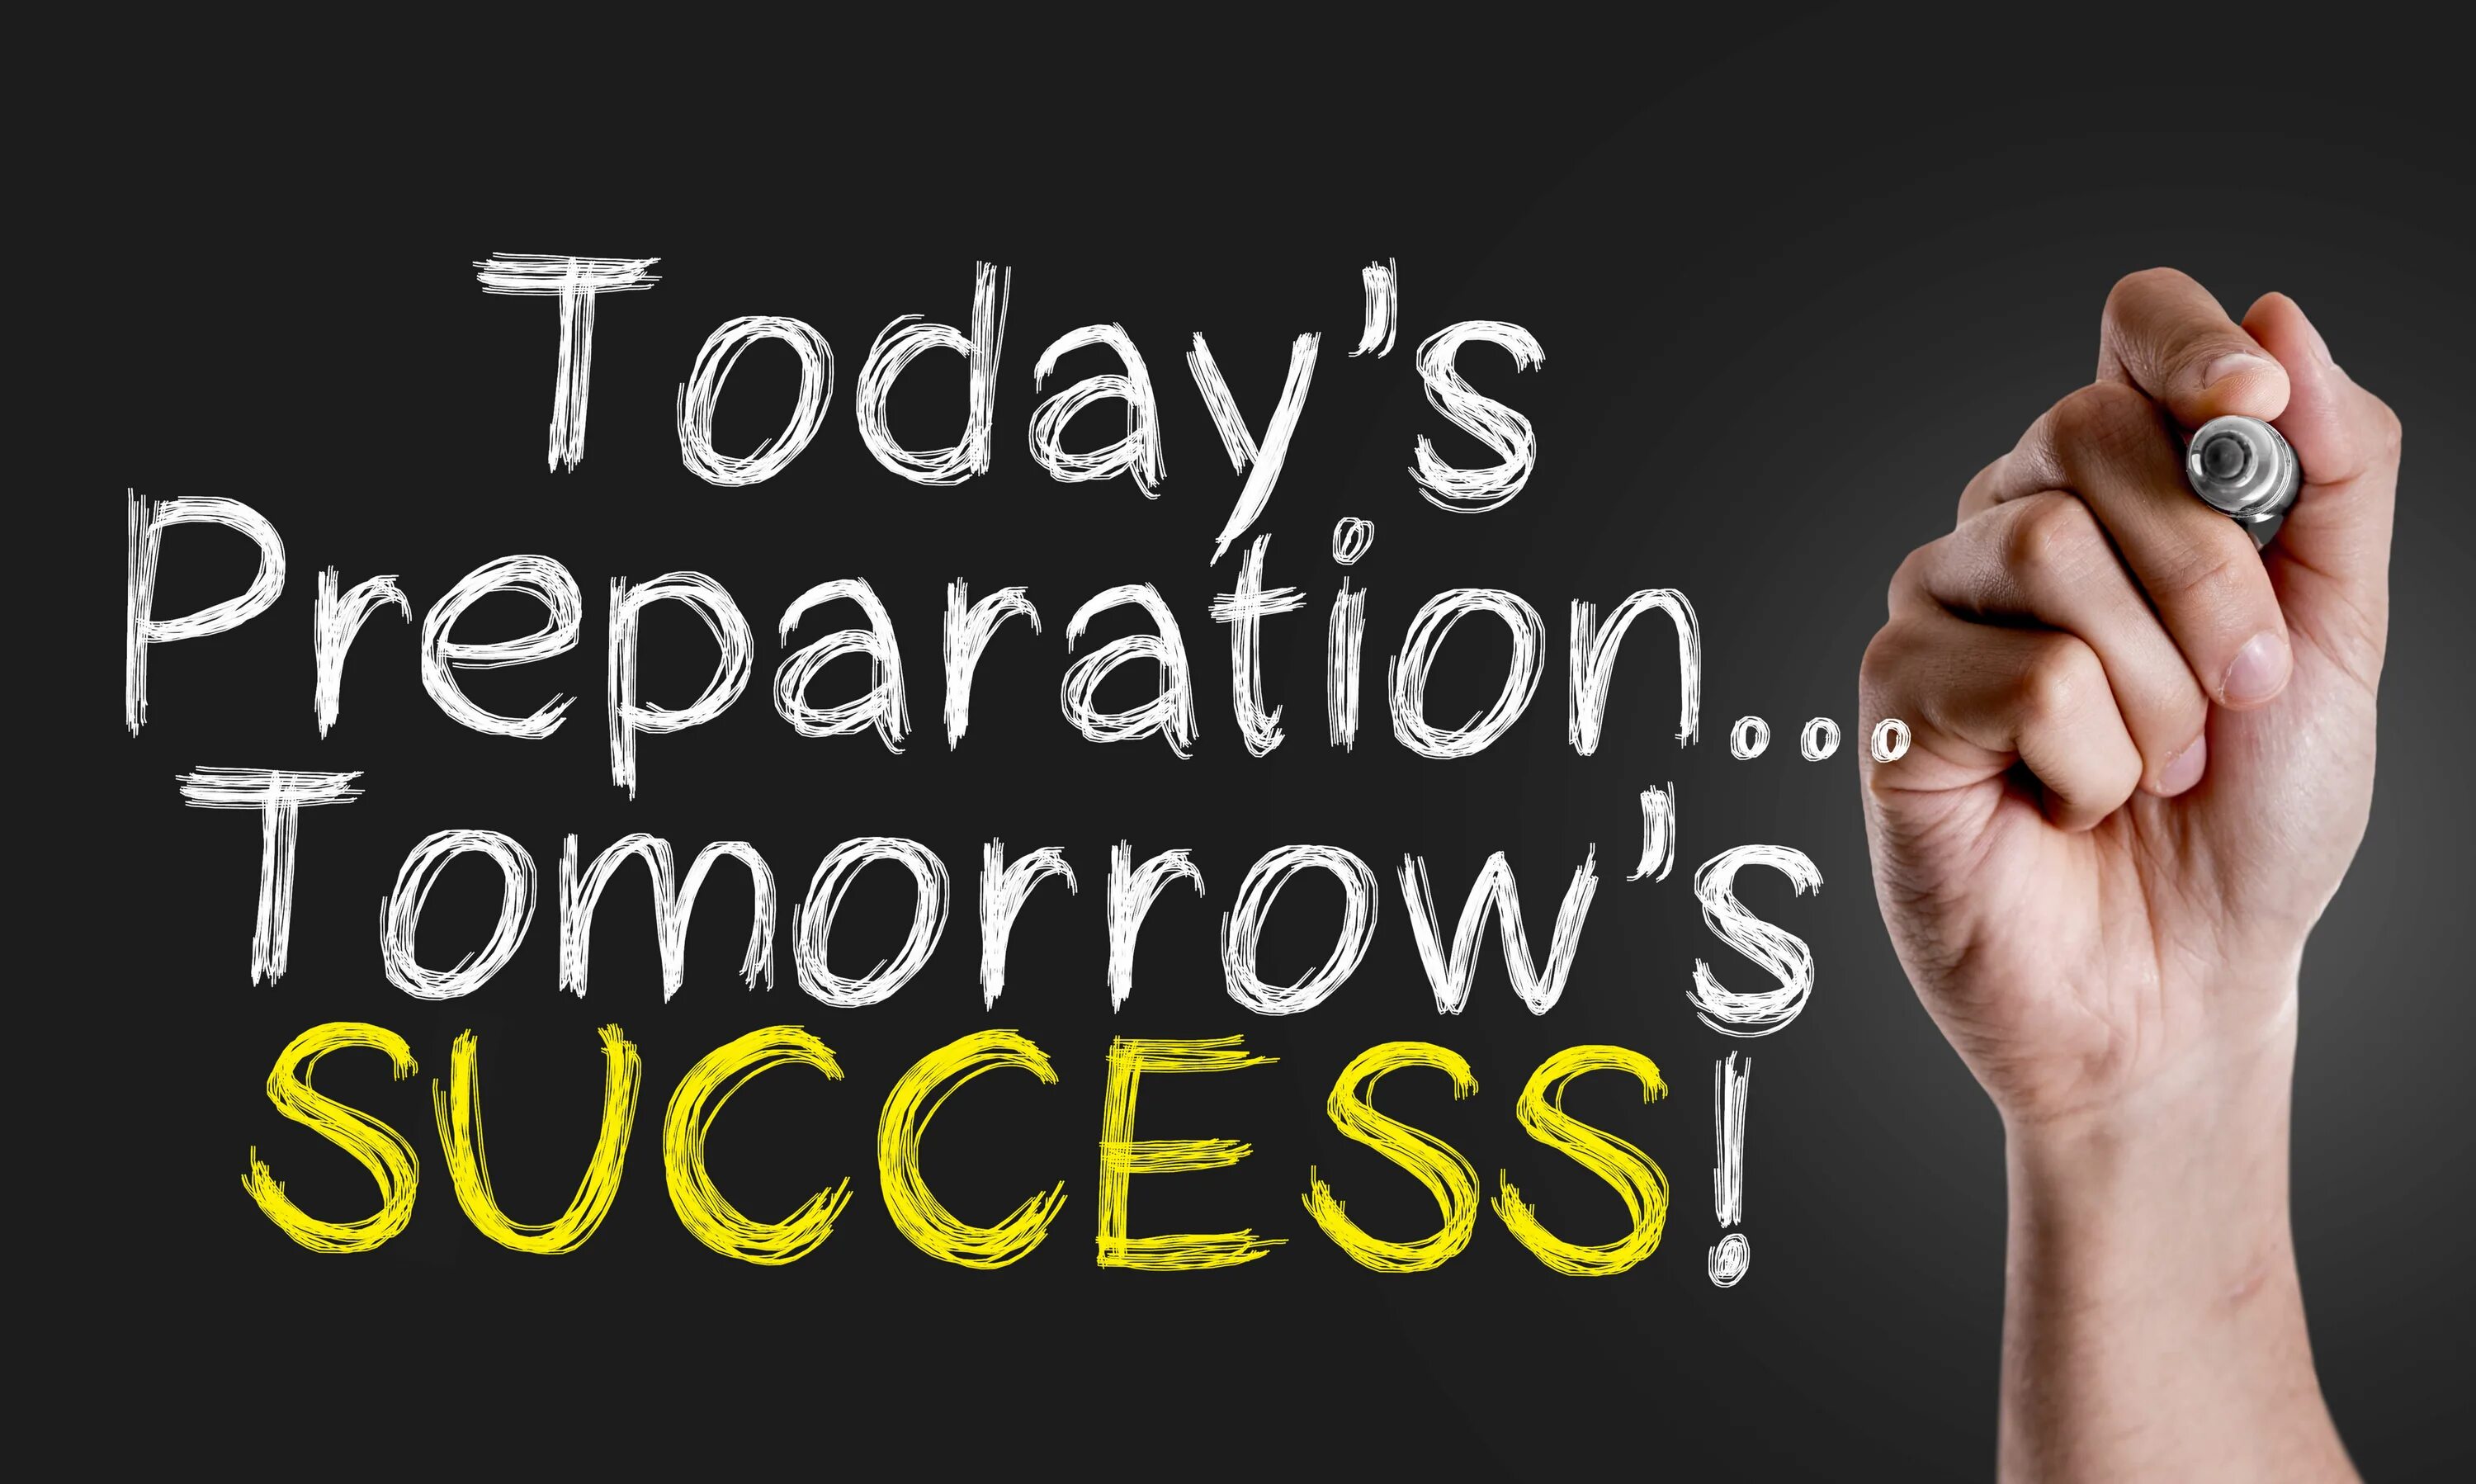 You can prepare better. Join us today. Todays preparation tomorrows success.